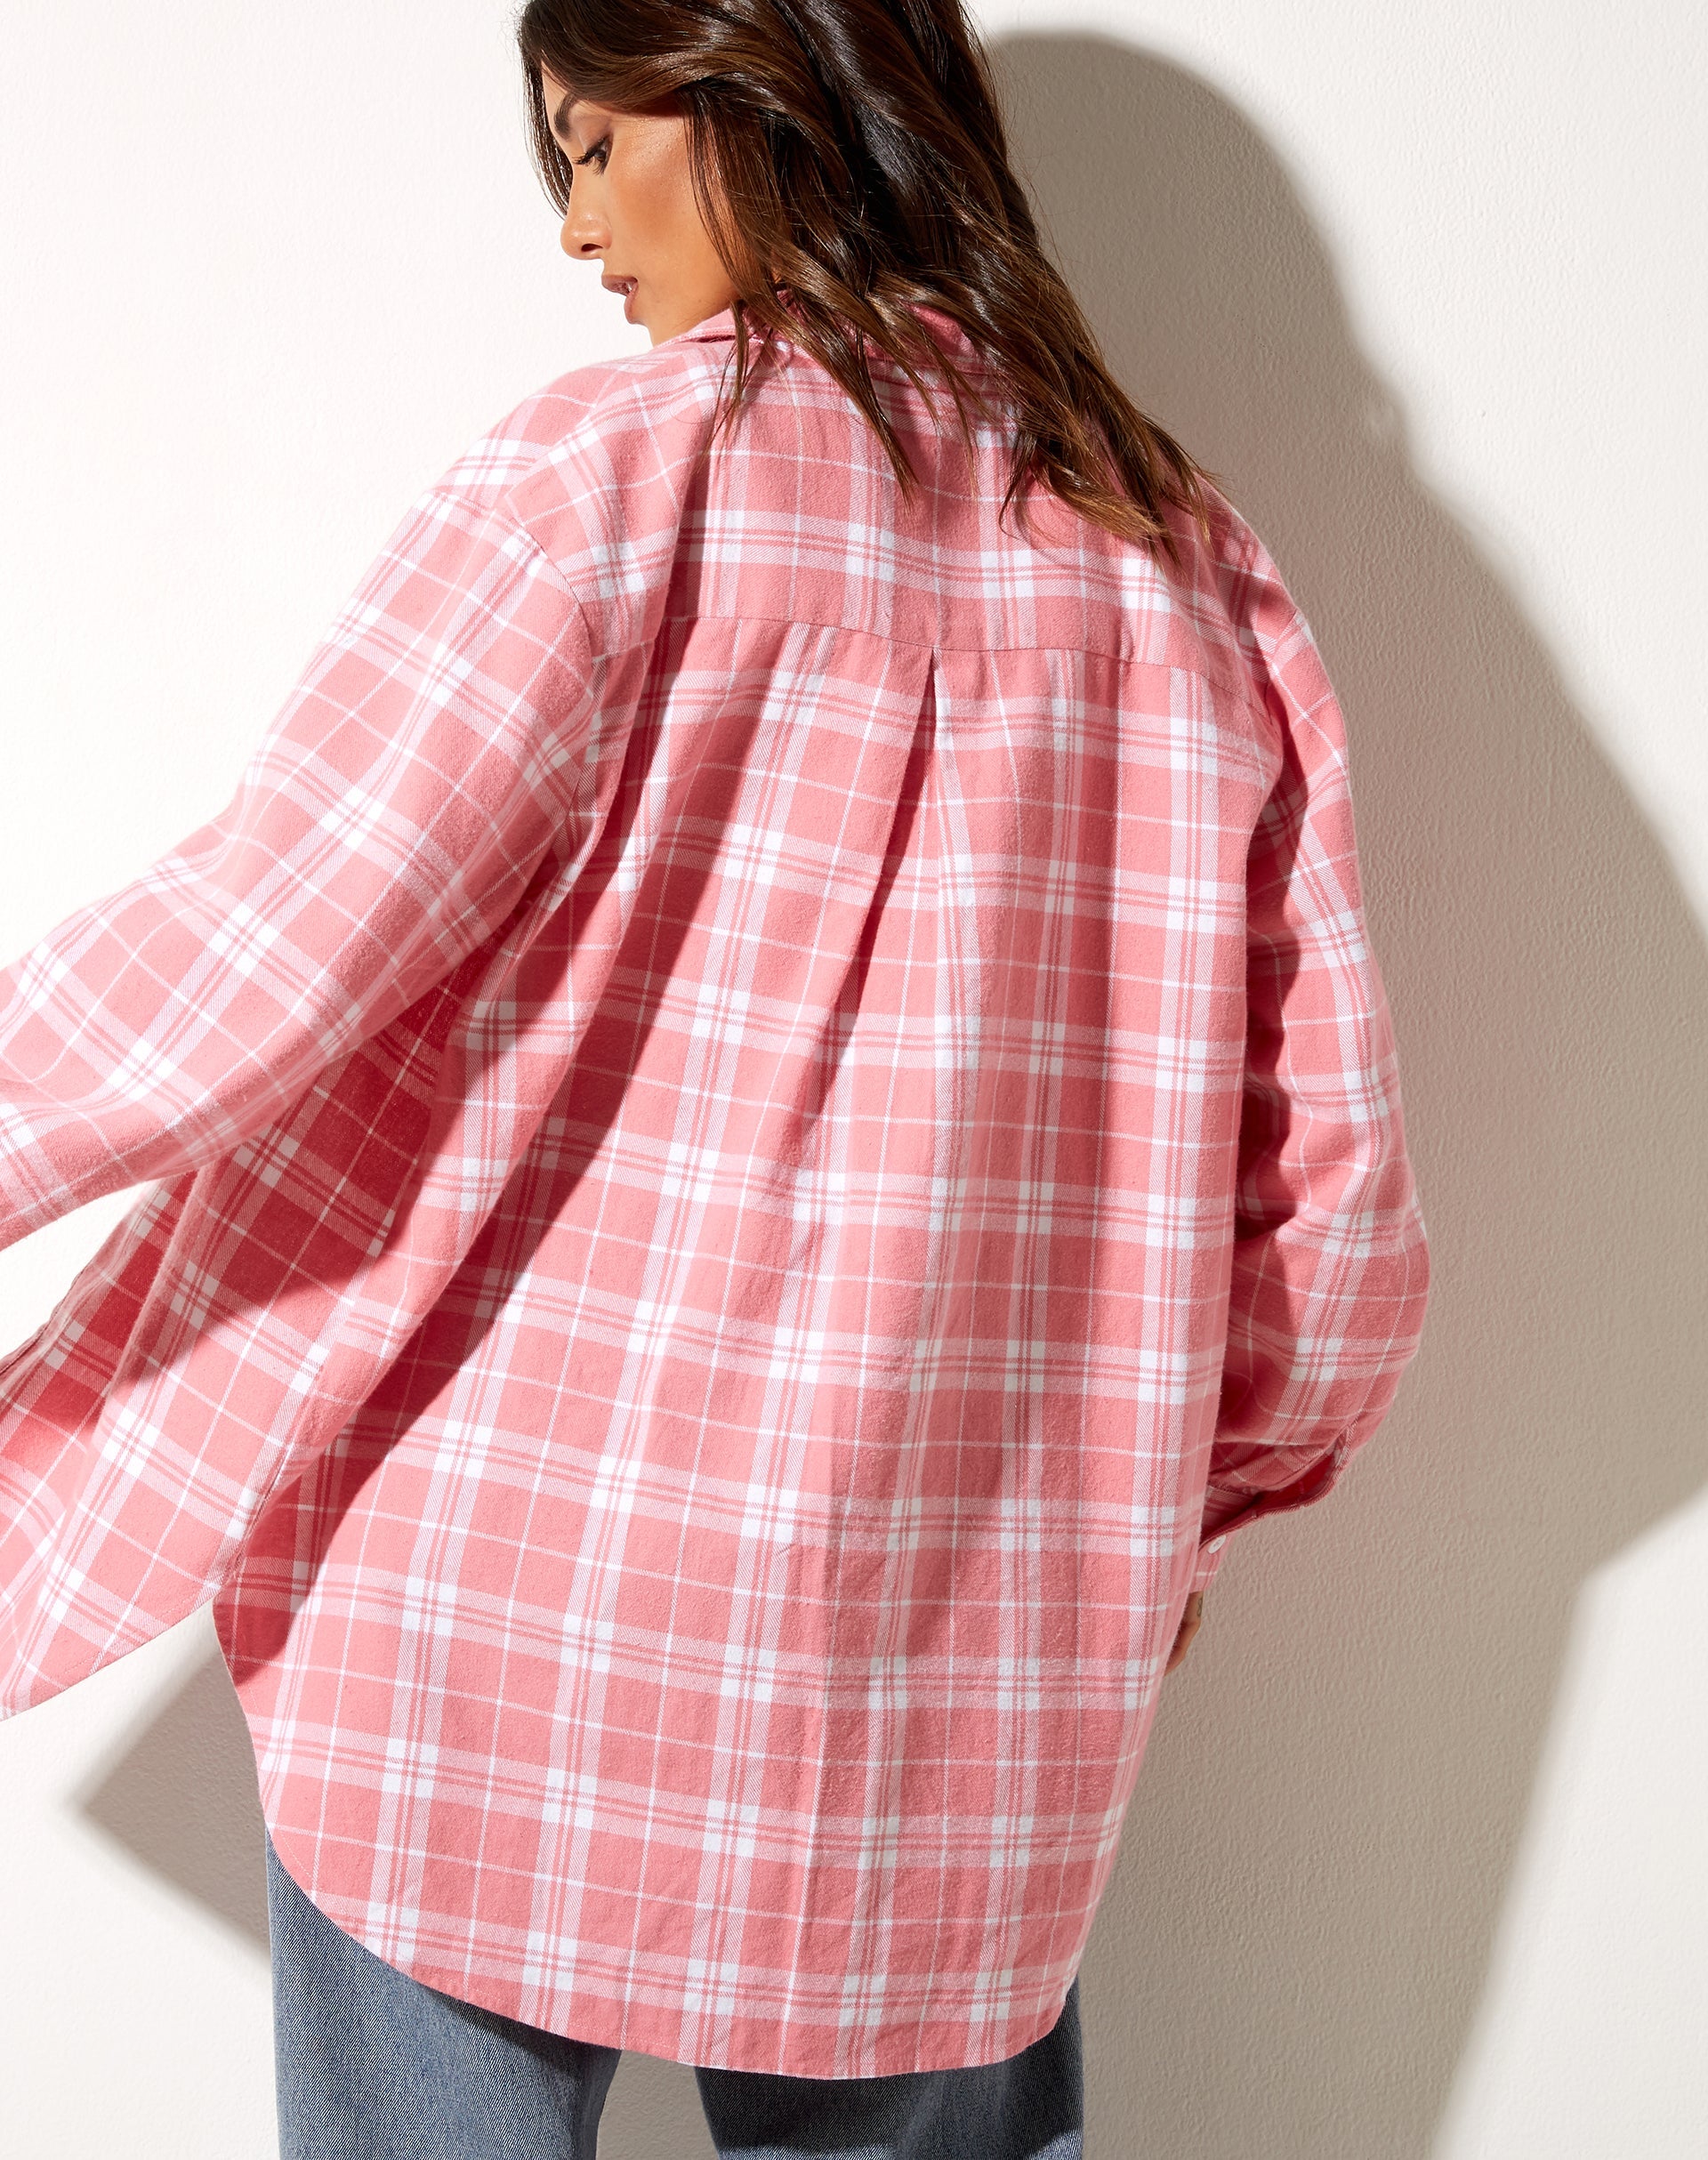 Image of Gane Shirt in Check Pink White